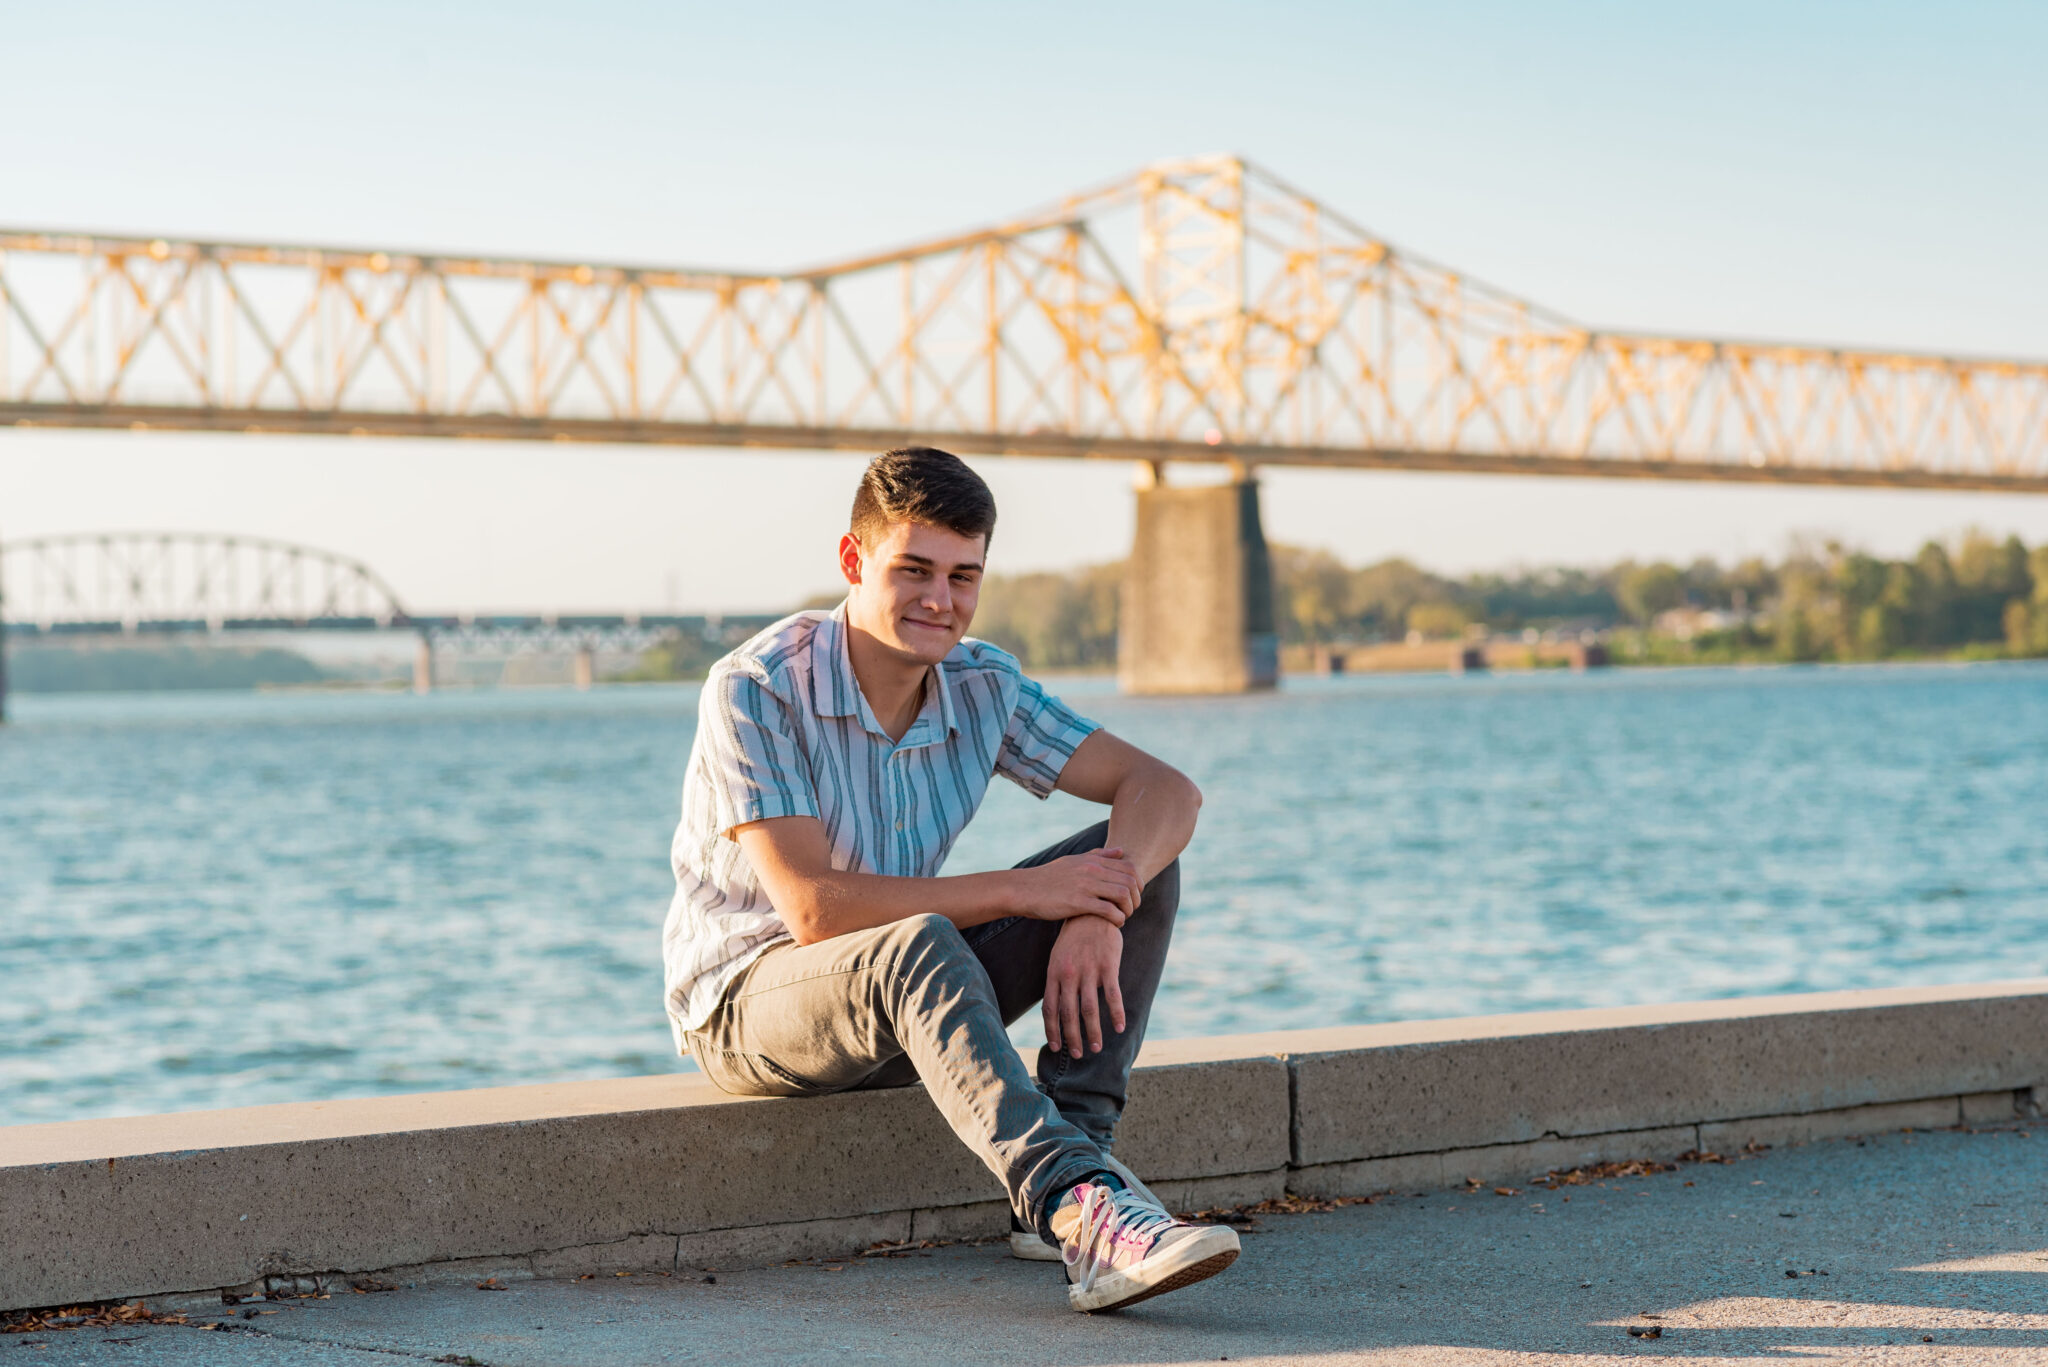 Teen boy sits in front of the Ohio River with yellow bridge behind him at sunset